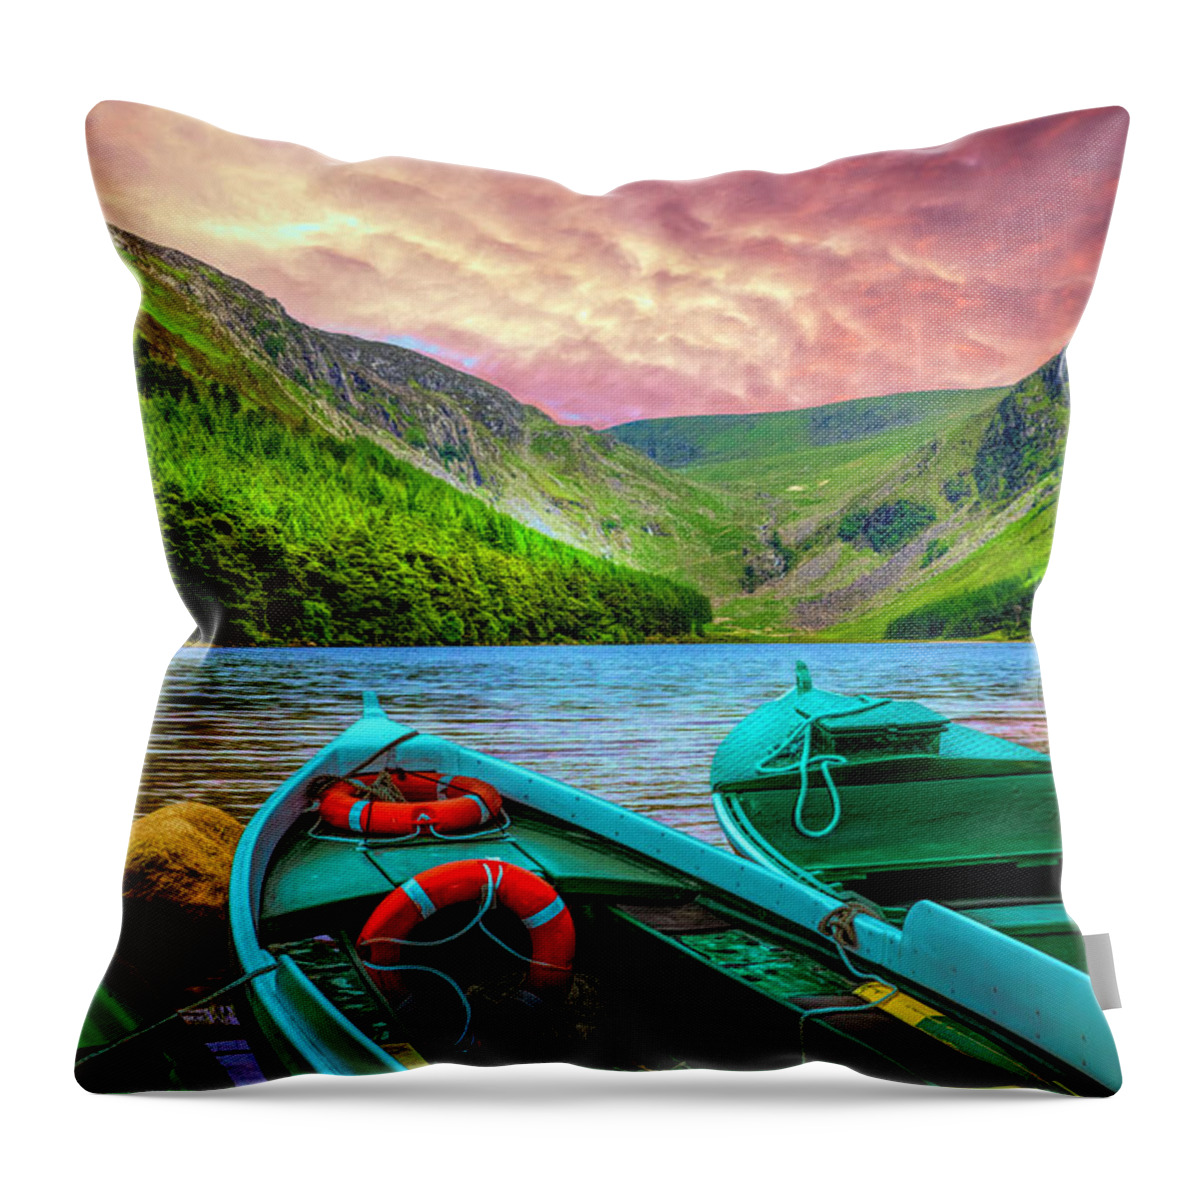 Boats Throw Pillow featuring the photograph Admiring the Beauty by Debra and Dave Vanderlaan